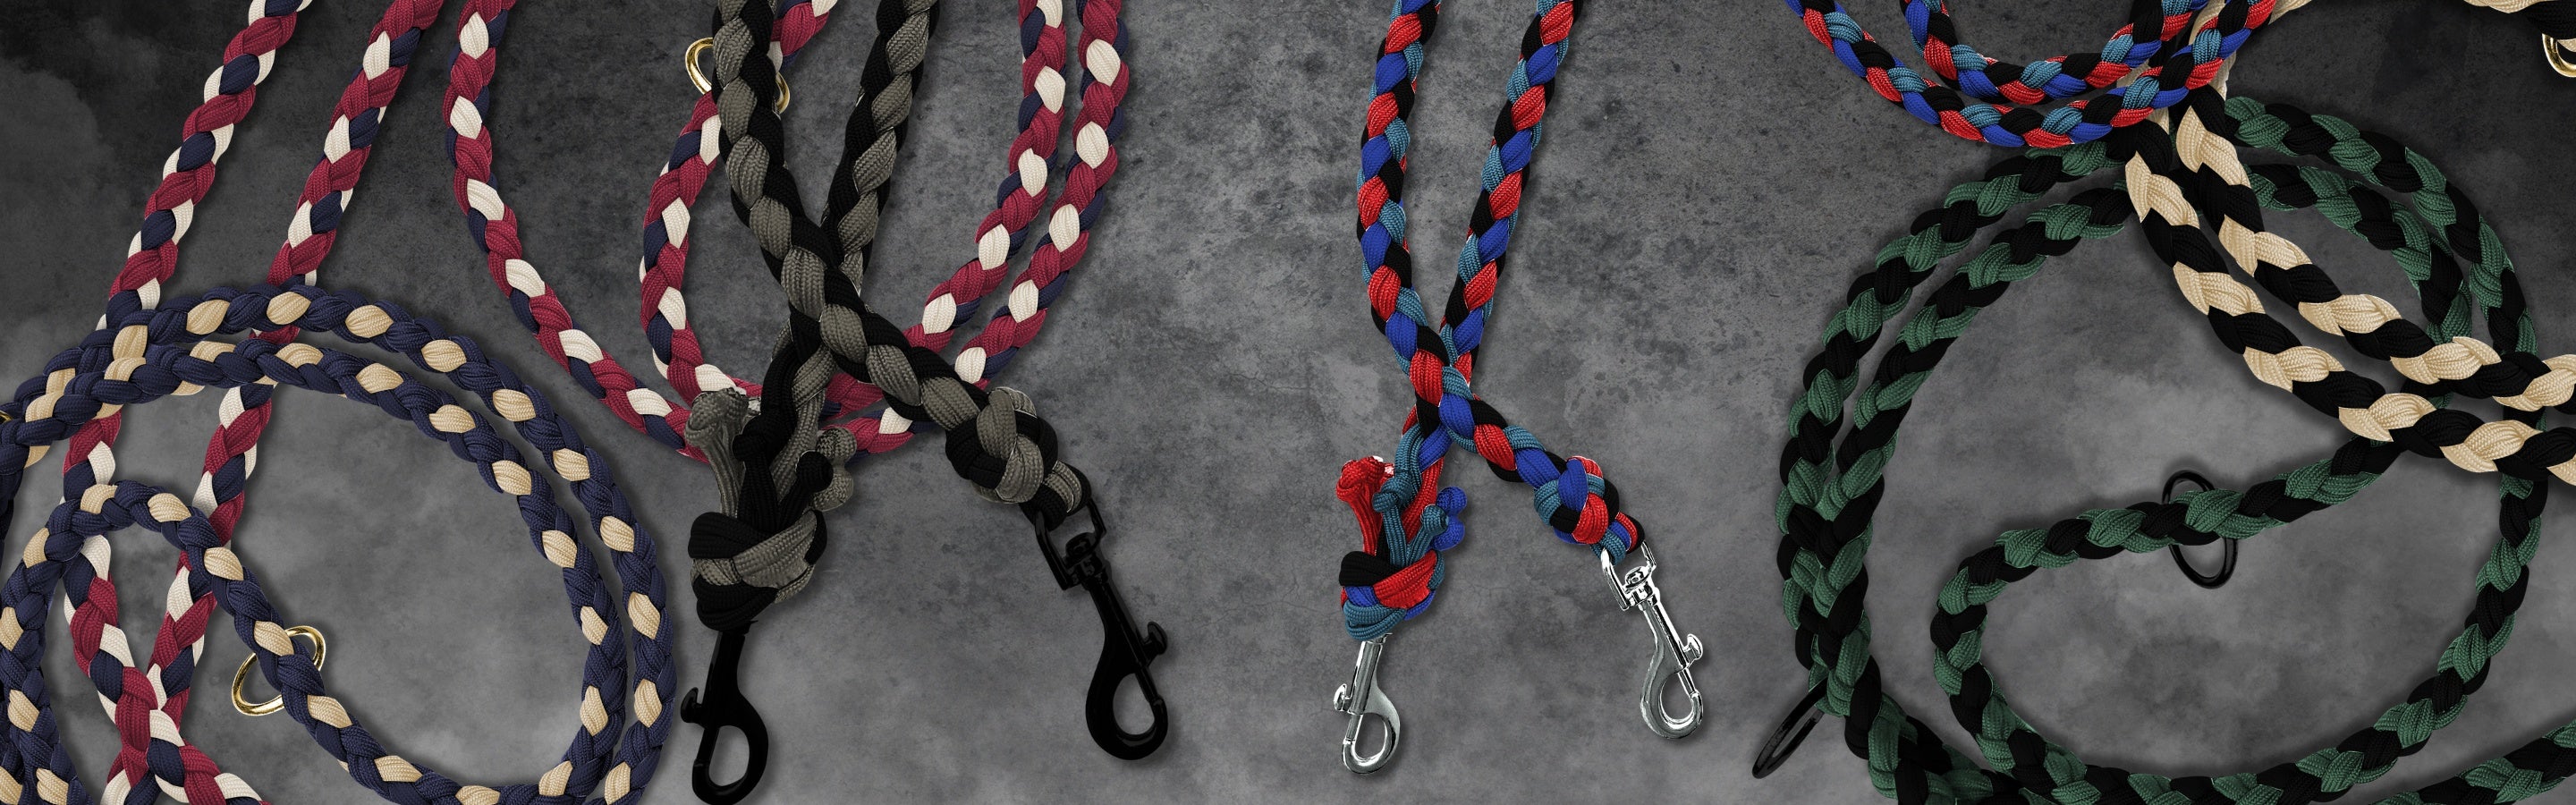 Various paracord dog leashes with background